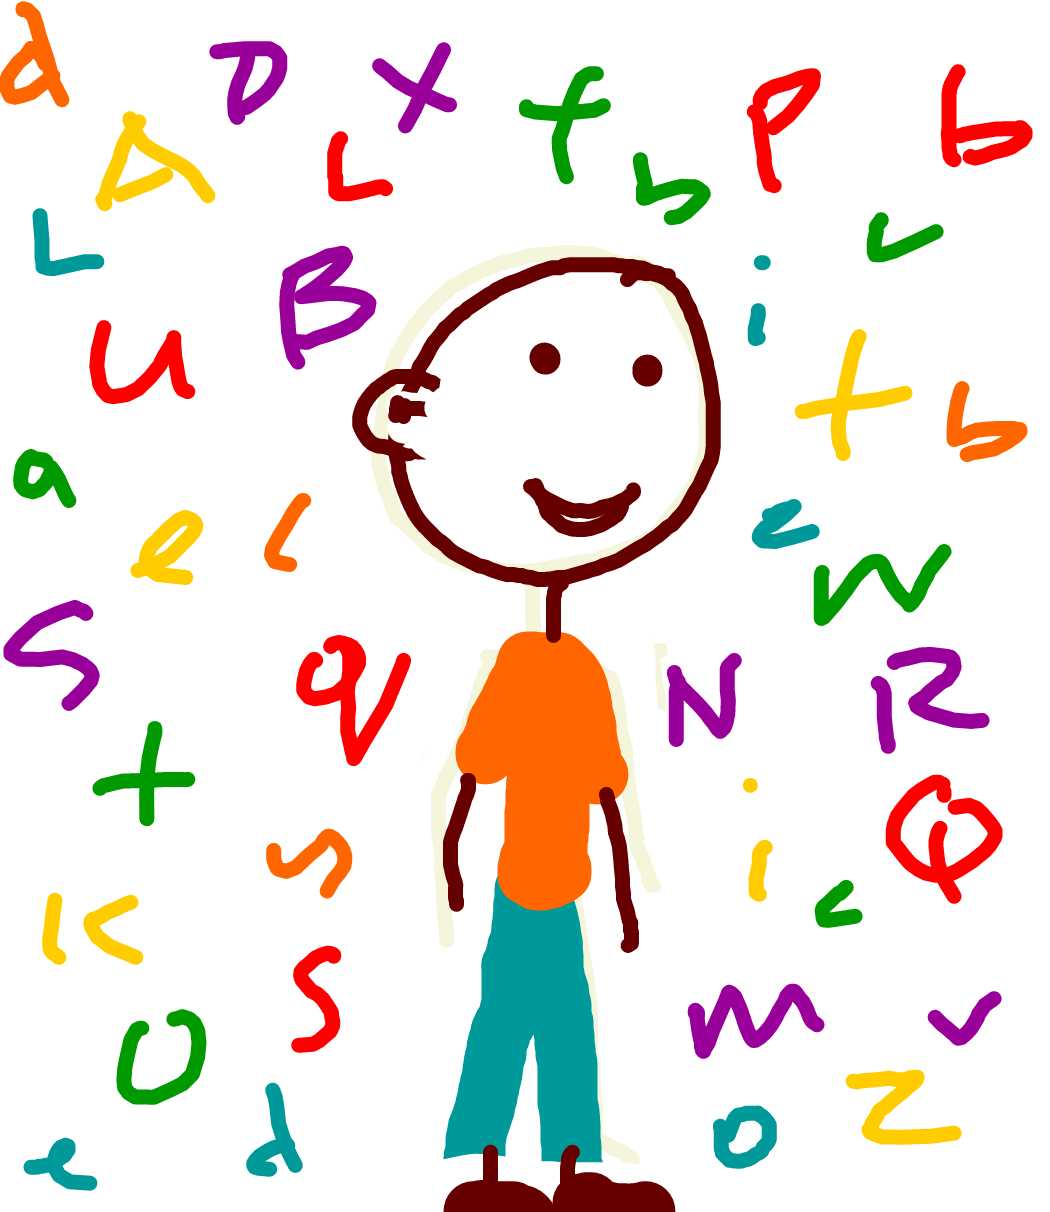 all the alphabets